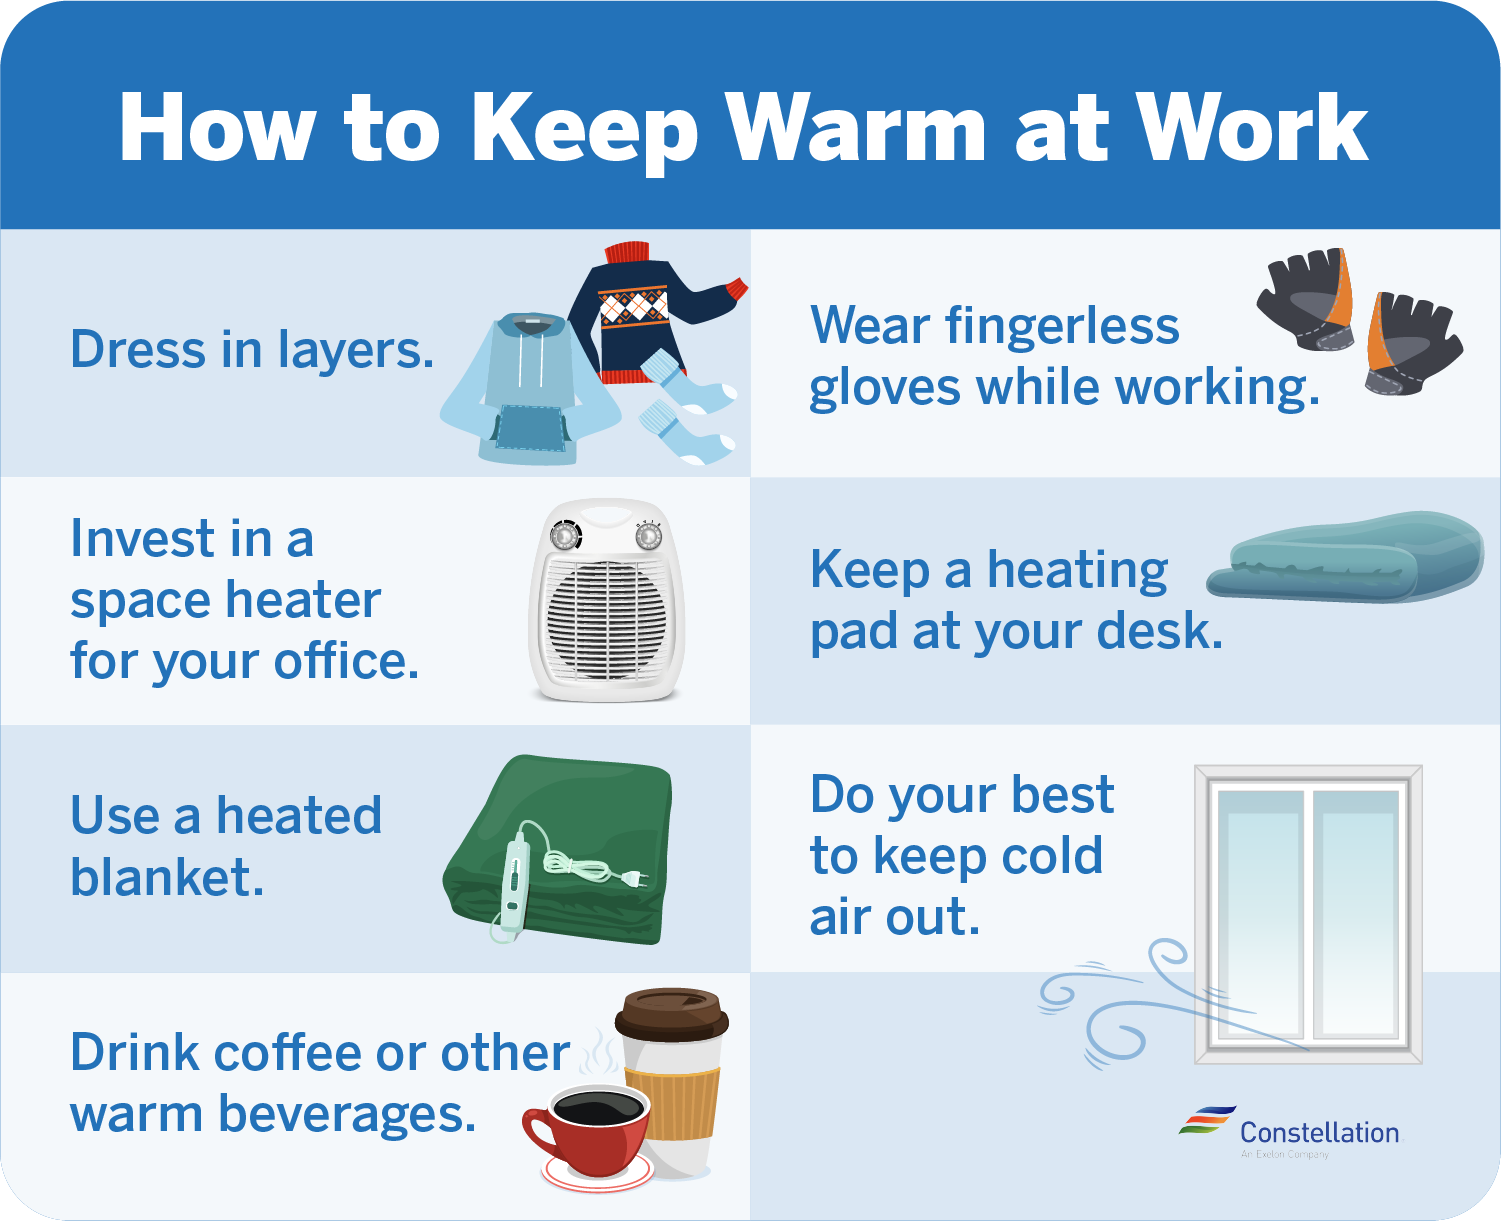 How to keep warm at work